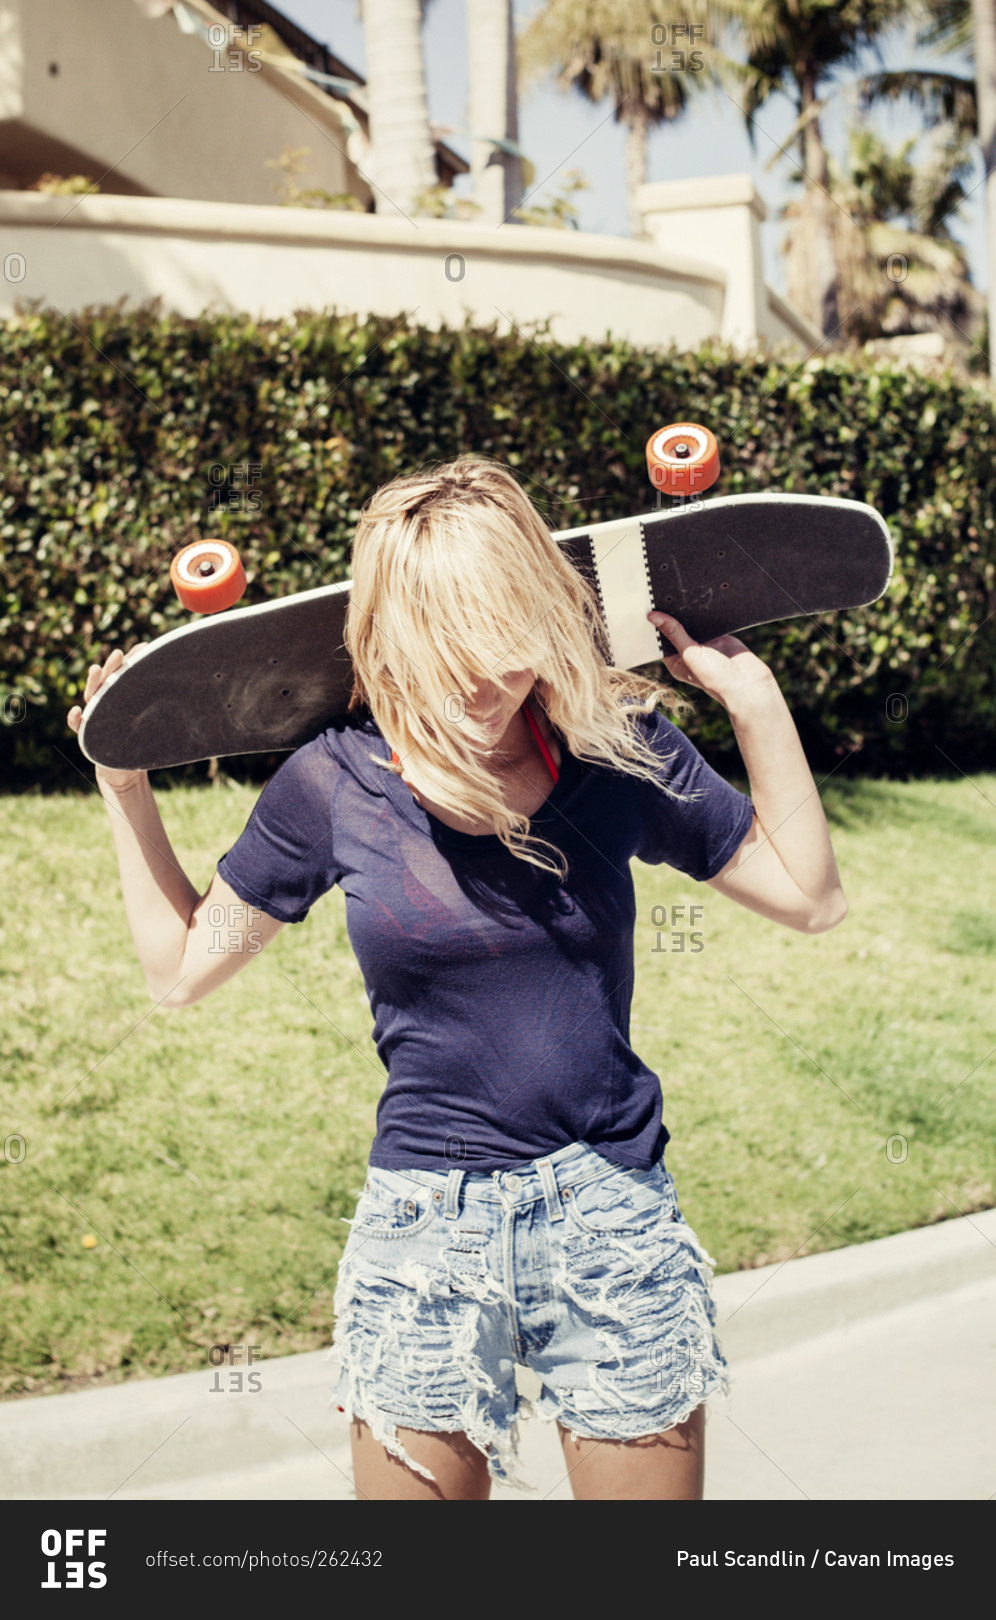 A girl lifts her skateboard in the air